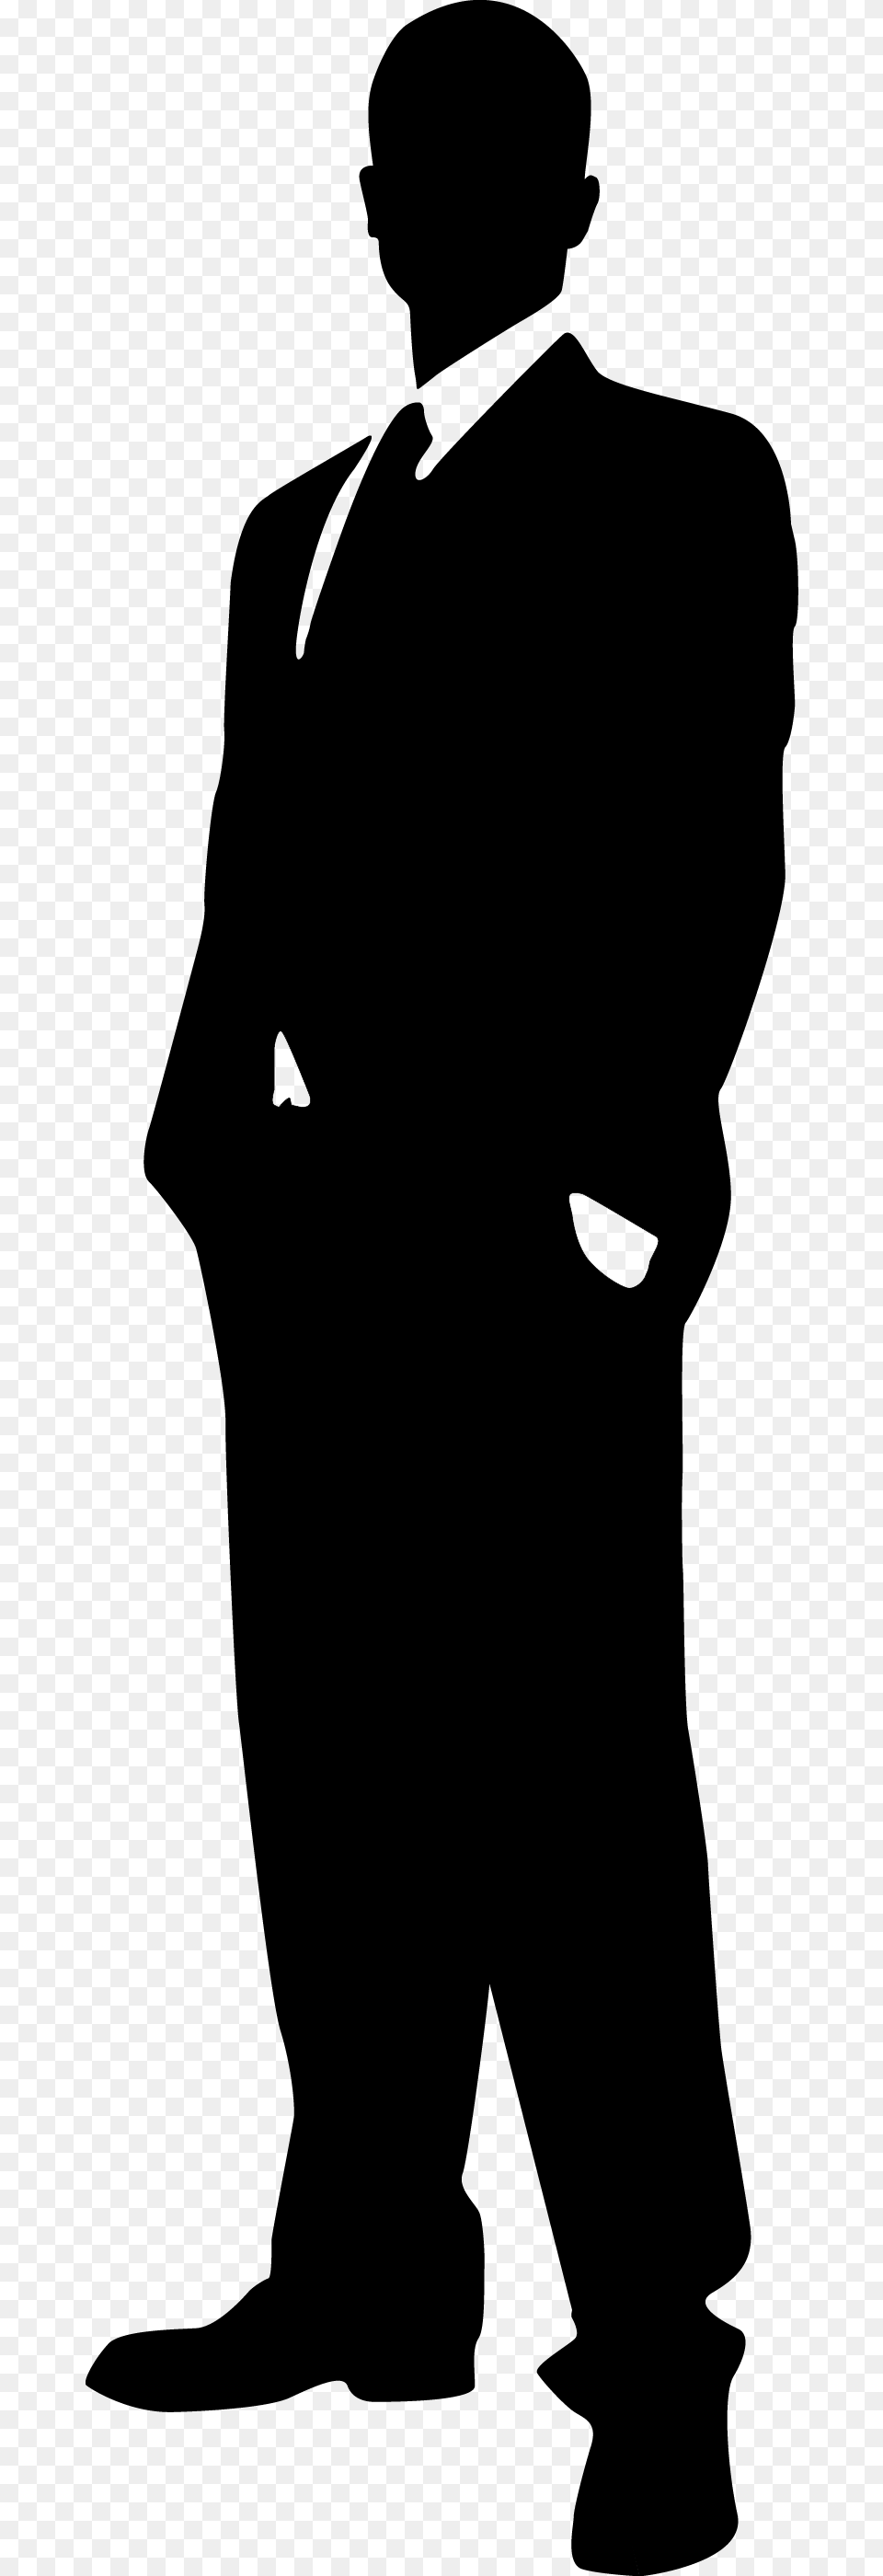 Man Praying Silhouette Man In Suit Silhouette, Formal Wear, Adult, Person, Male Free Transparent Png